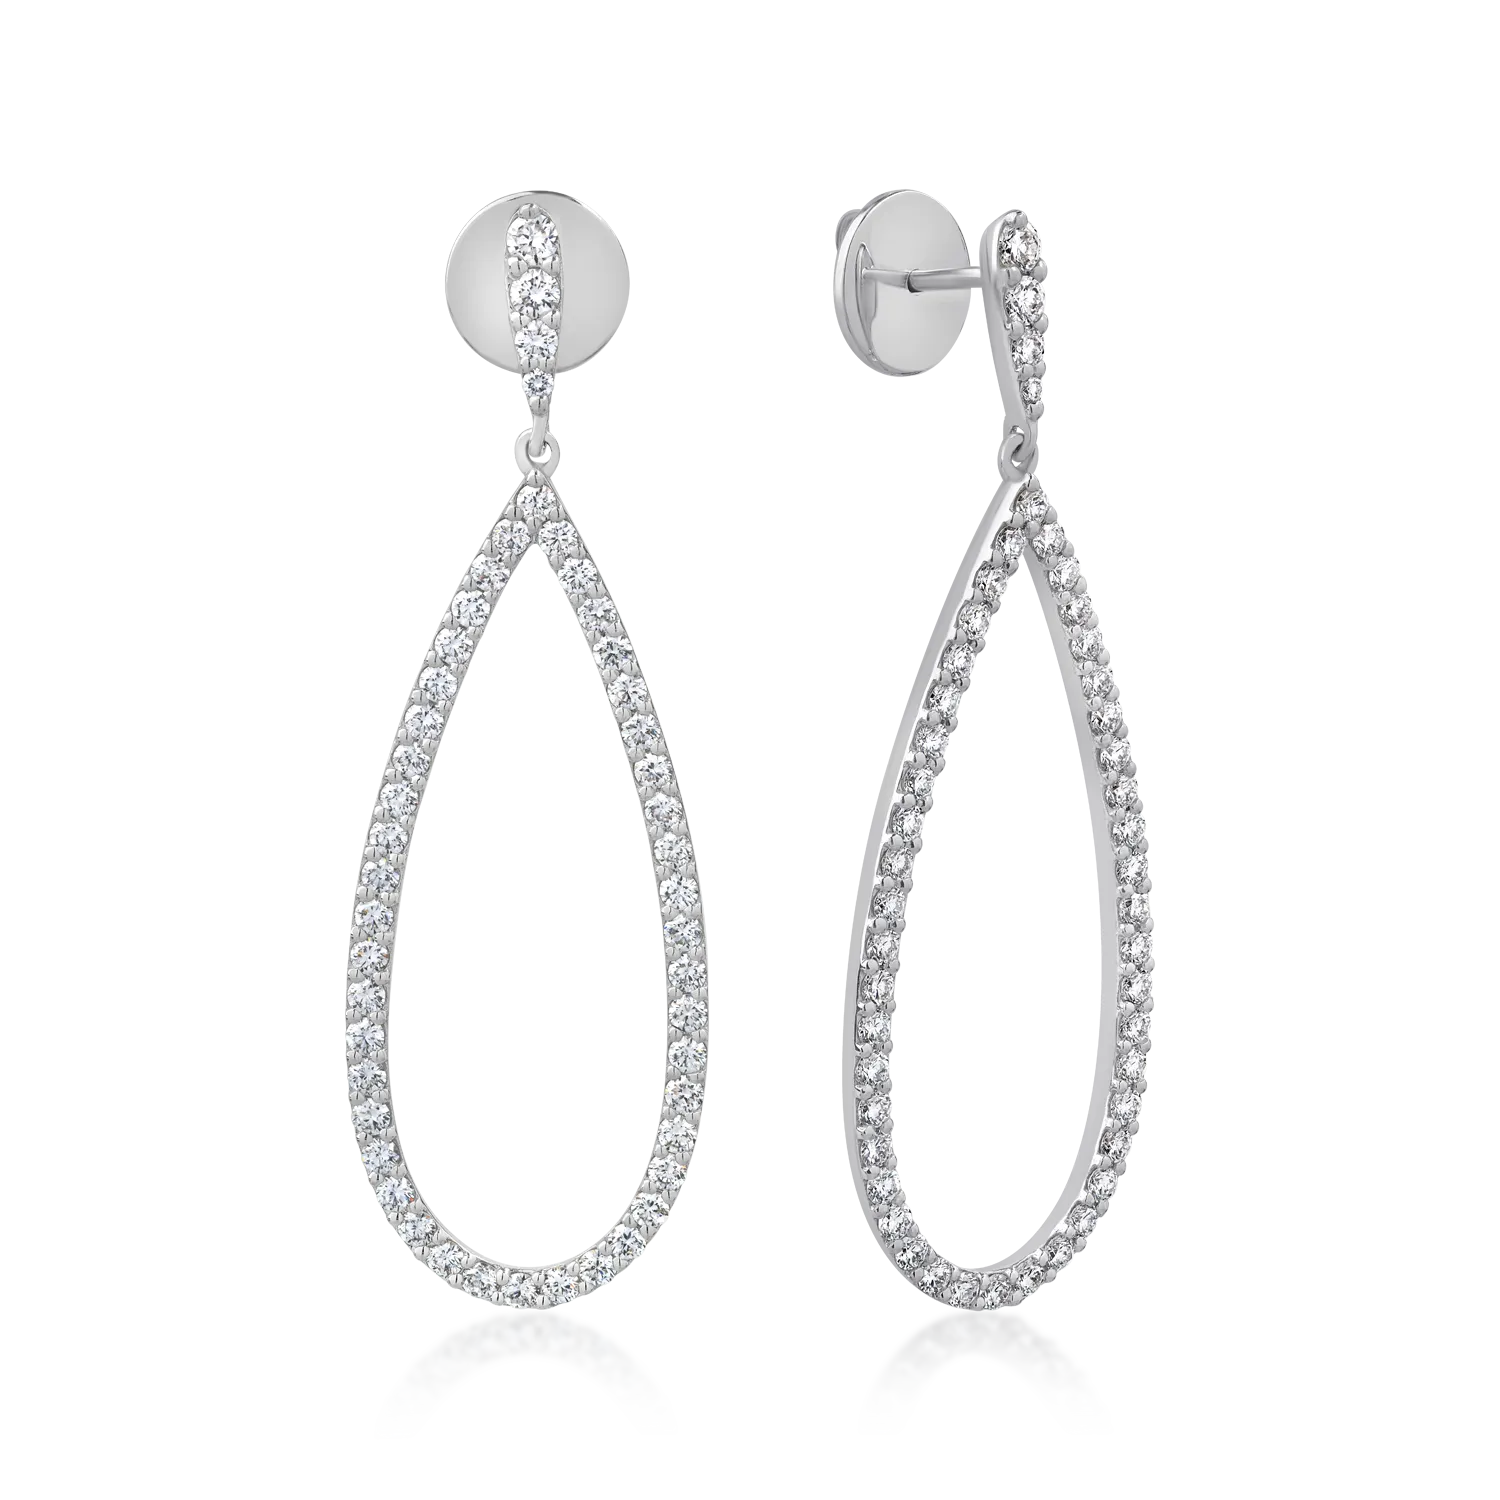 18K white gold earrings with 1.8ct diamonds